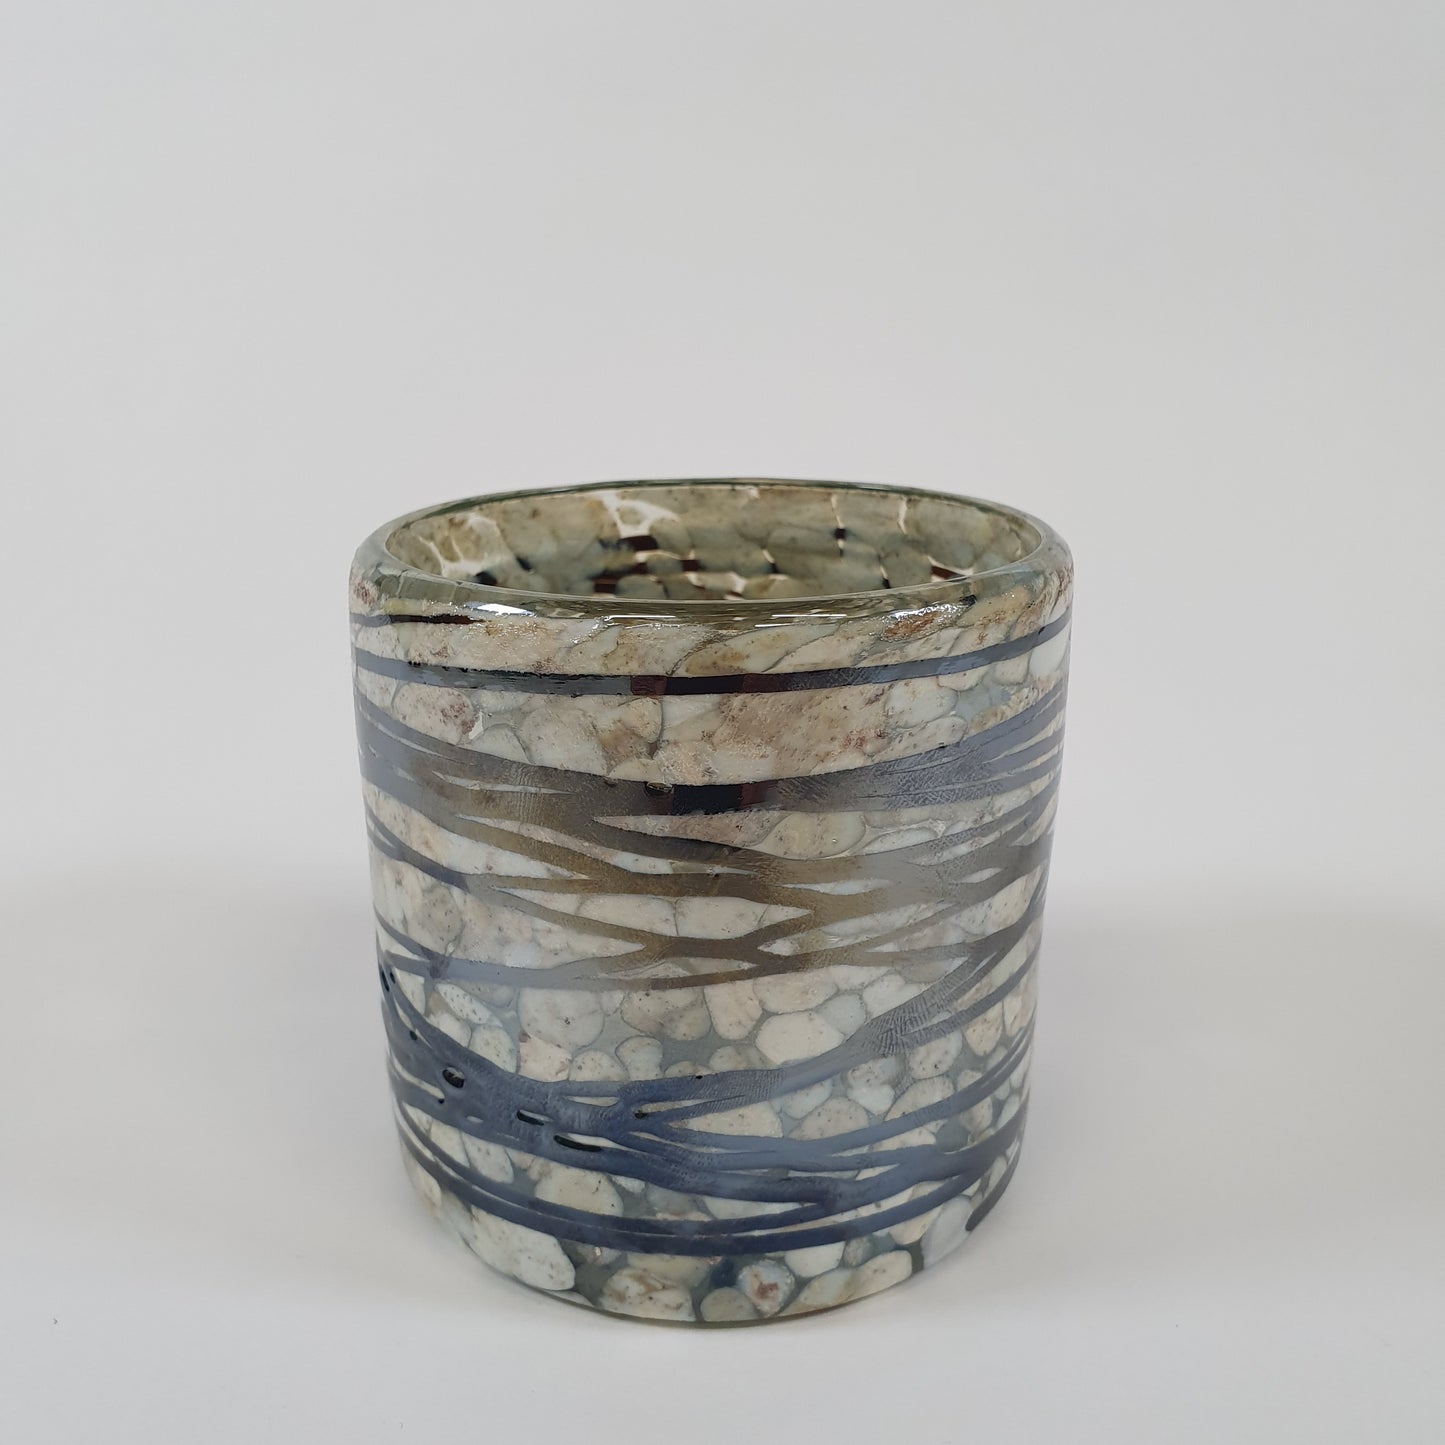 Perla Marble Edition - Mexican Tumbler / Marble and Dark Silver web pattern